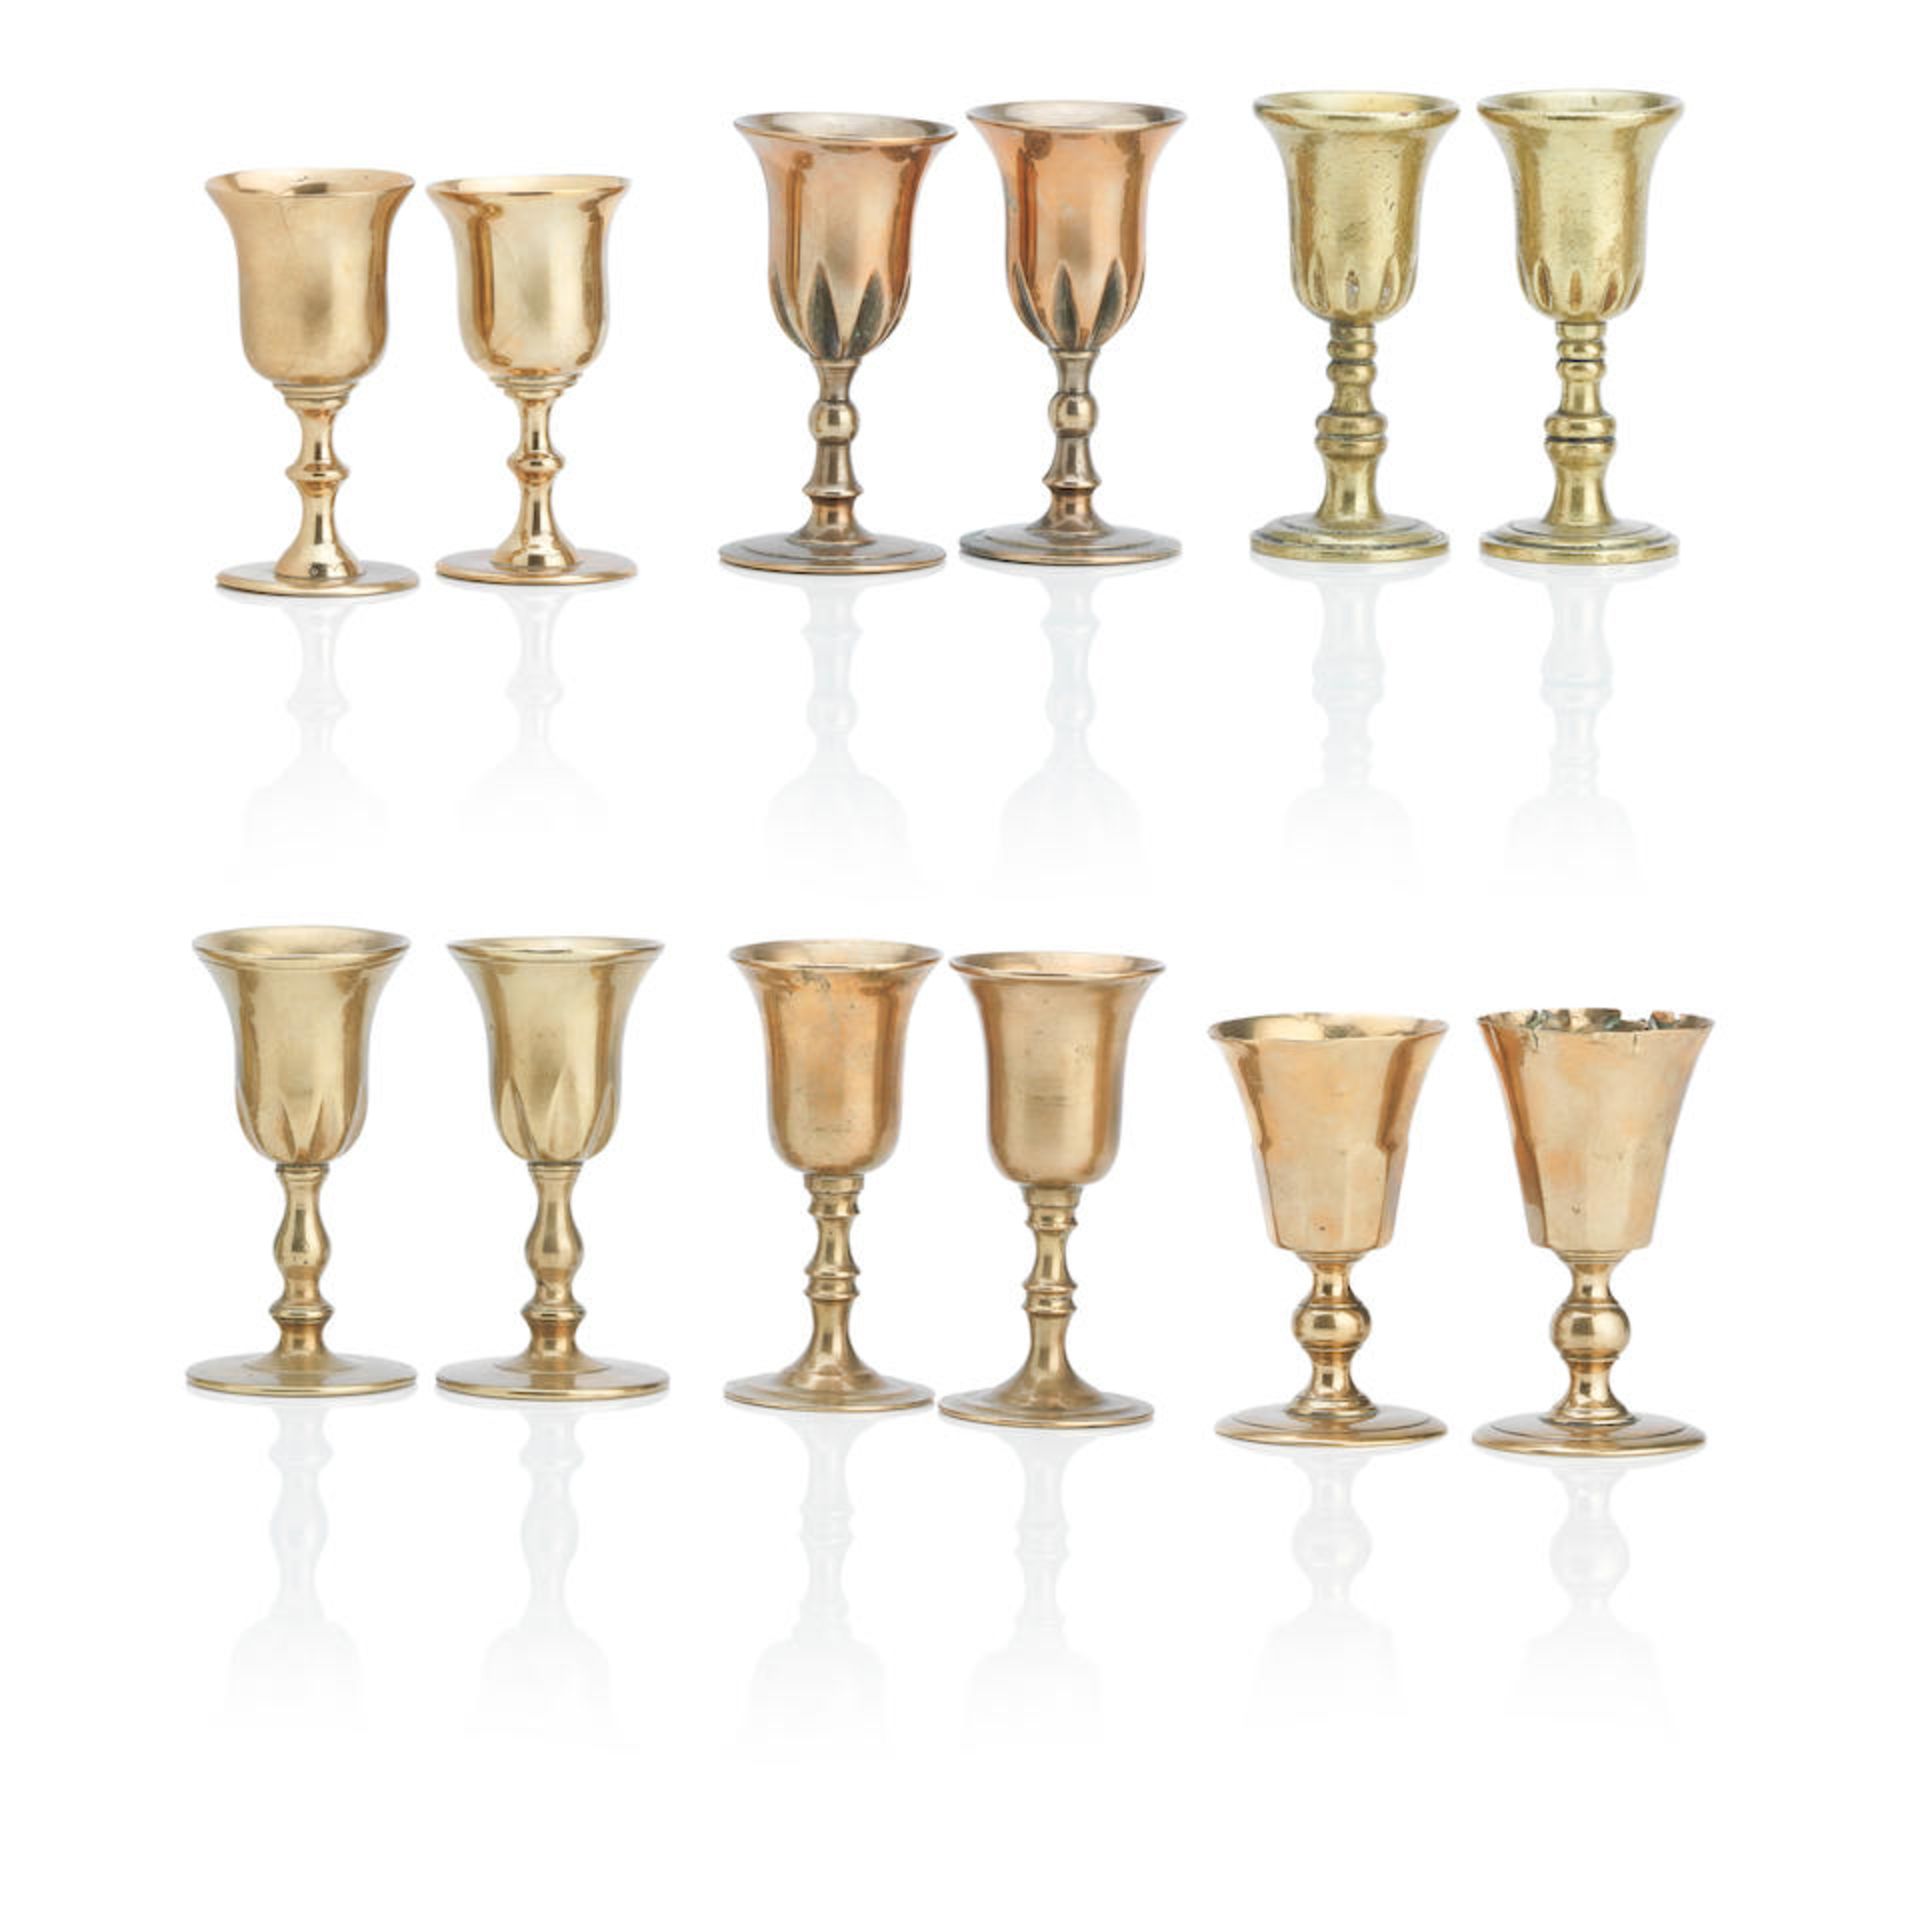 Six pairs of Scottish copper alloy travelling communion cups 18th/19th Century